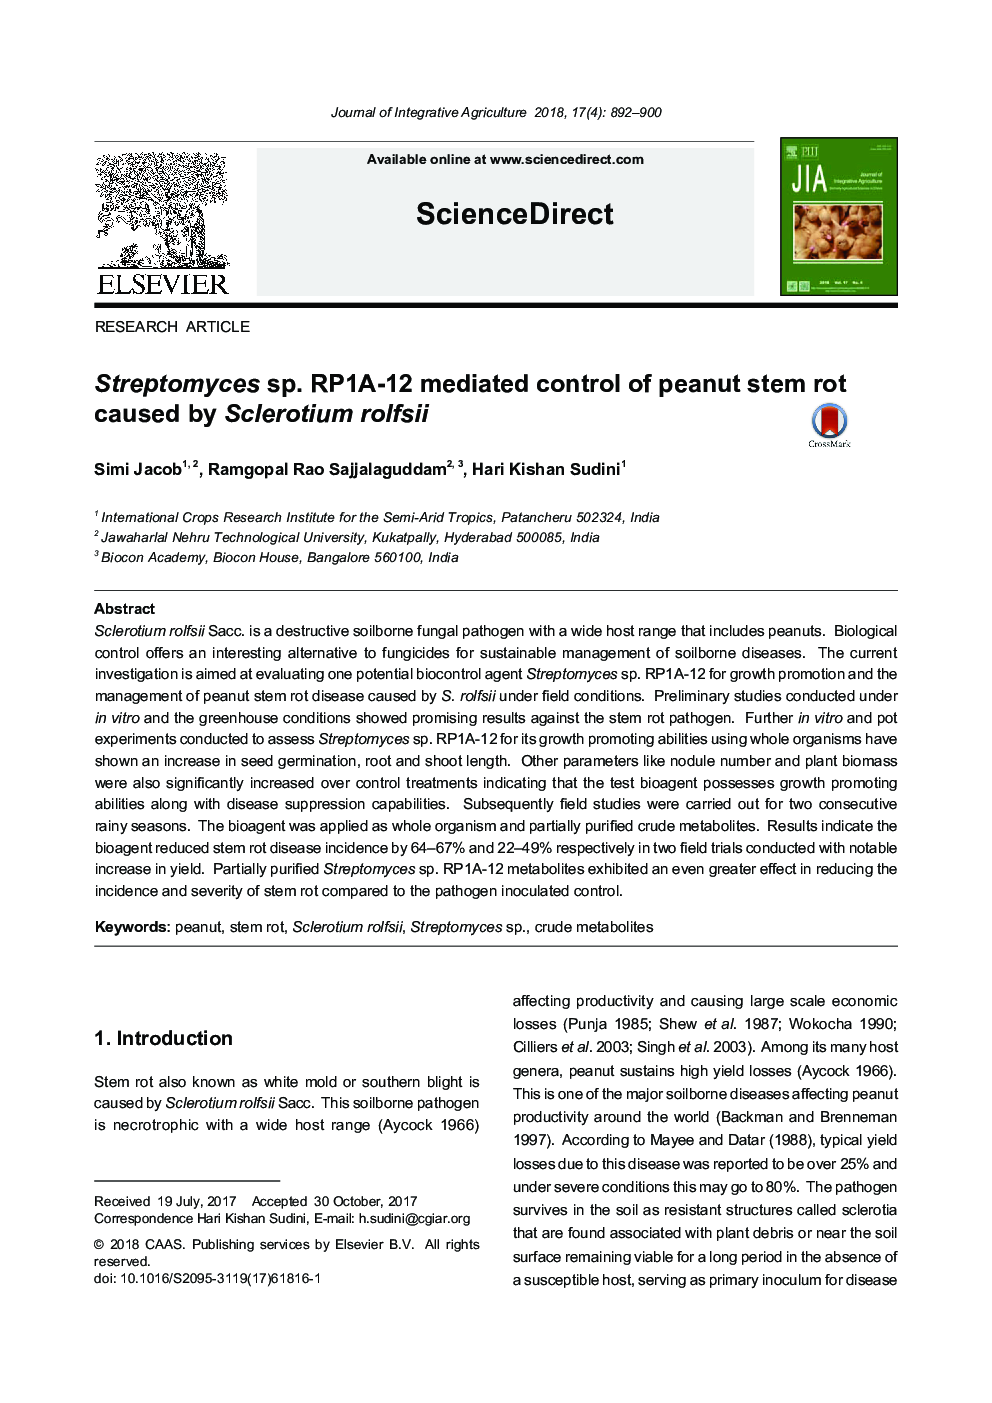 Streptomyces sp. RP1A-12 mediated control of peanut stem rot caused by Sclerotium rolfsii